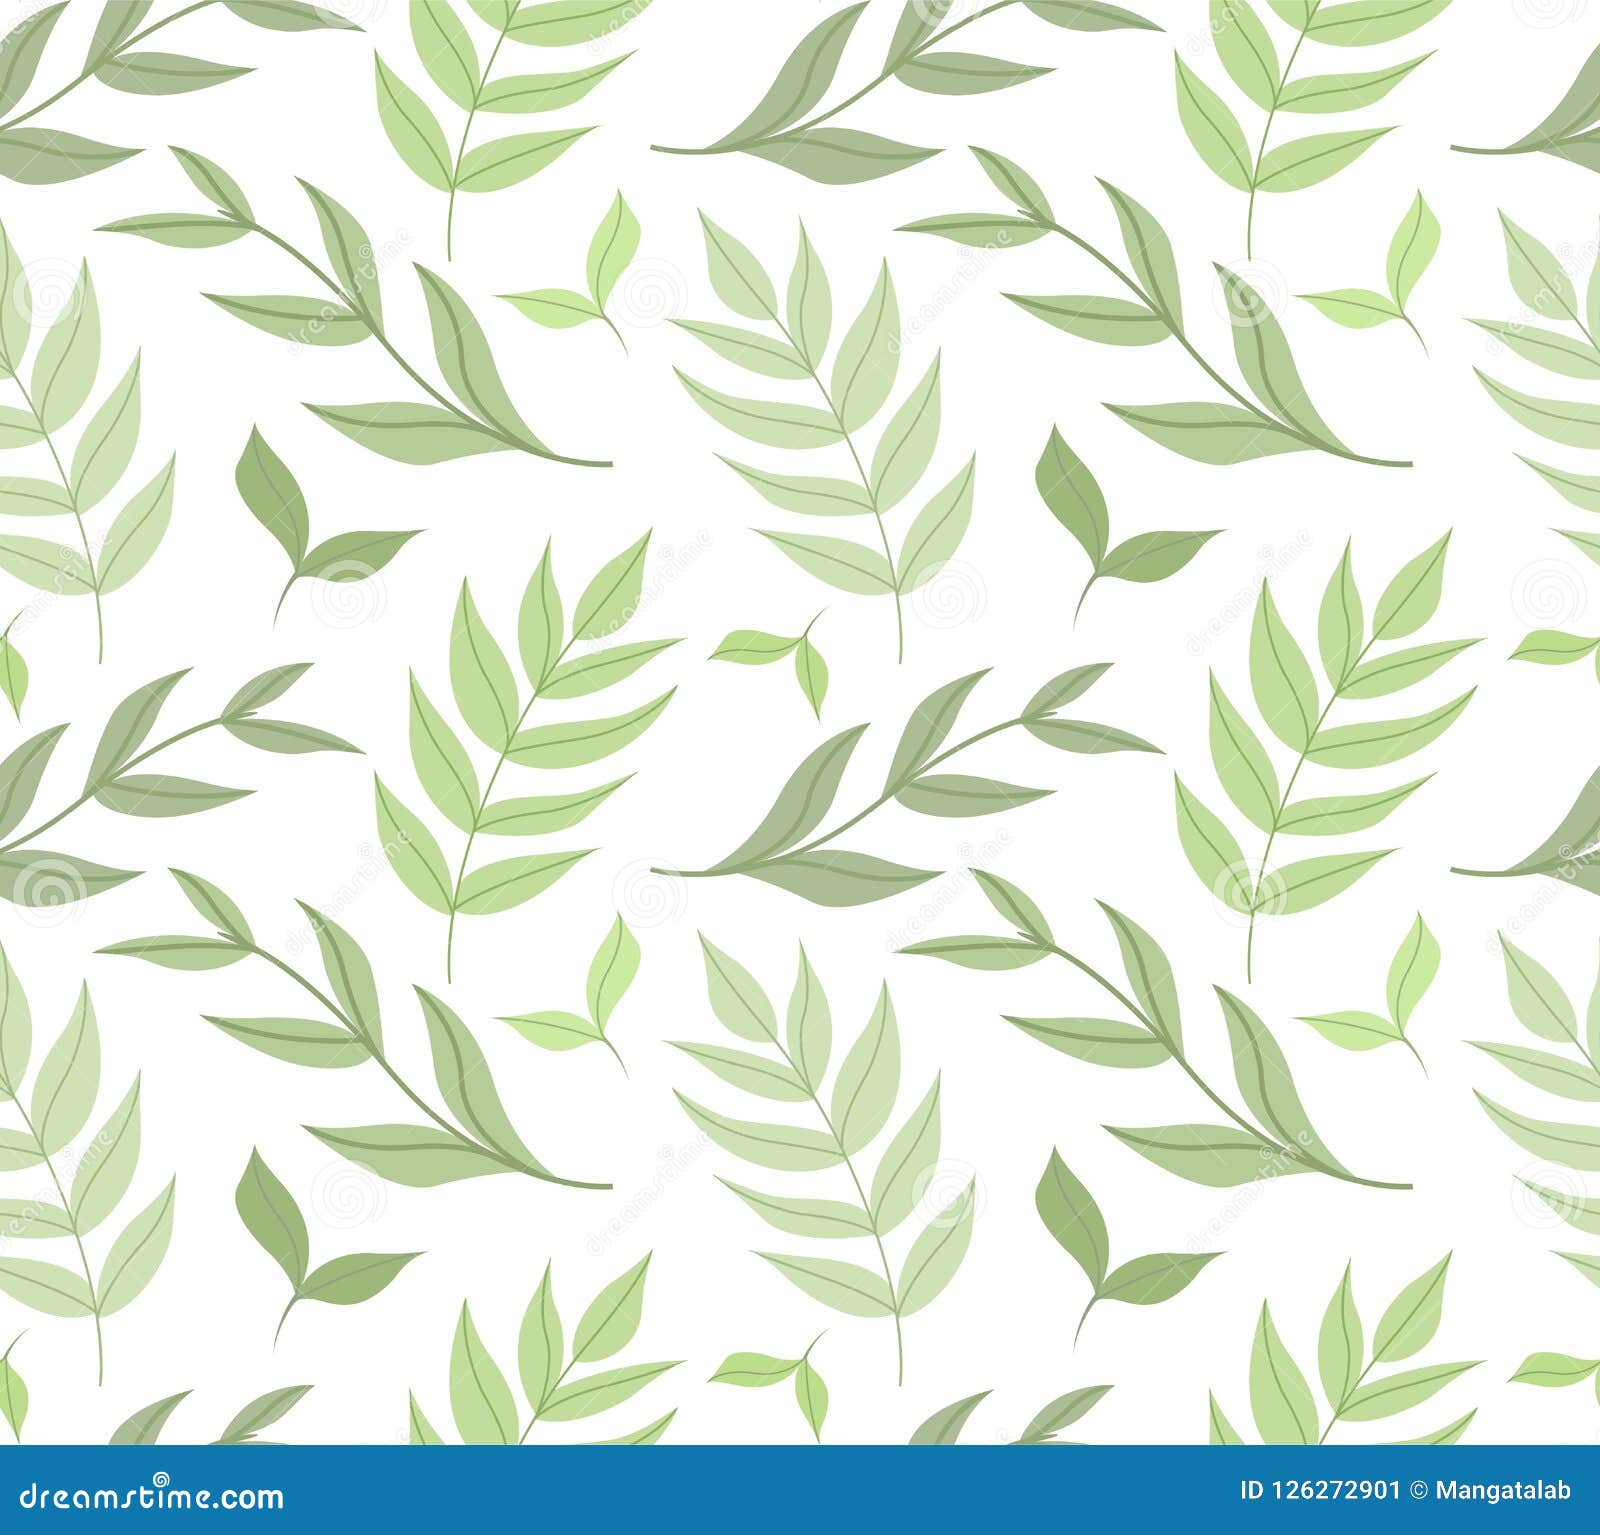 Cute Floral Stylish Seamless Pattern. Vector Doodle Leaf Background